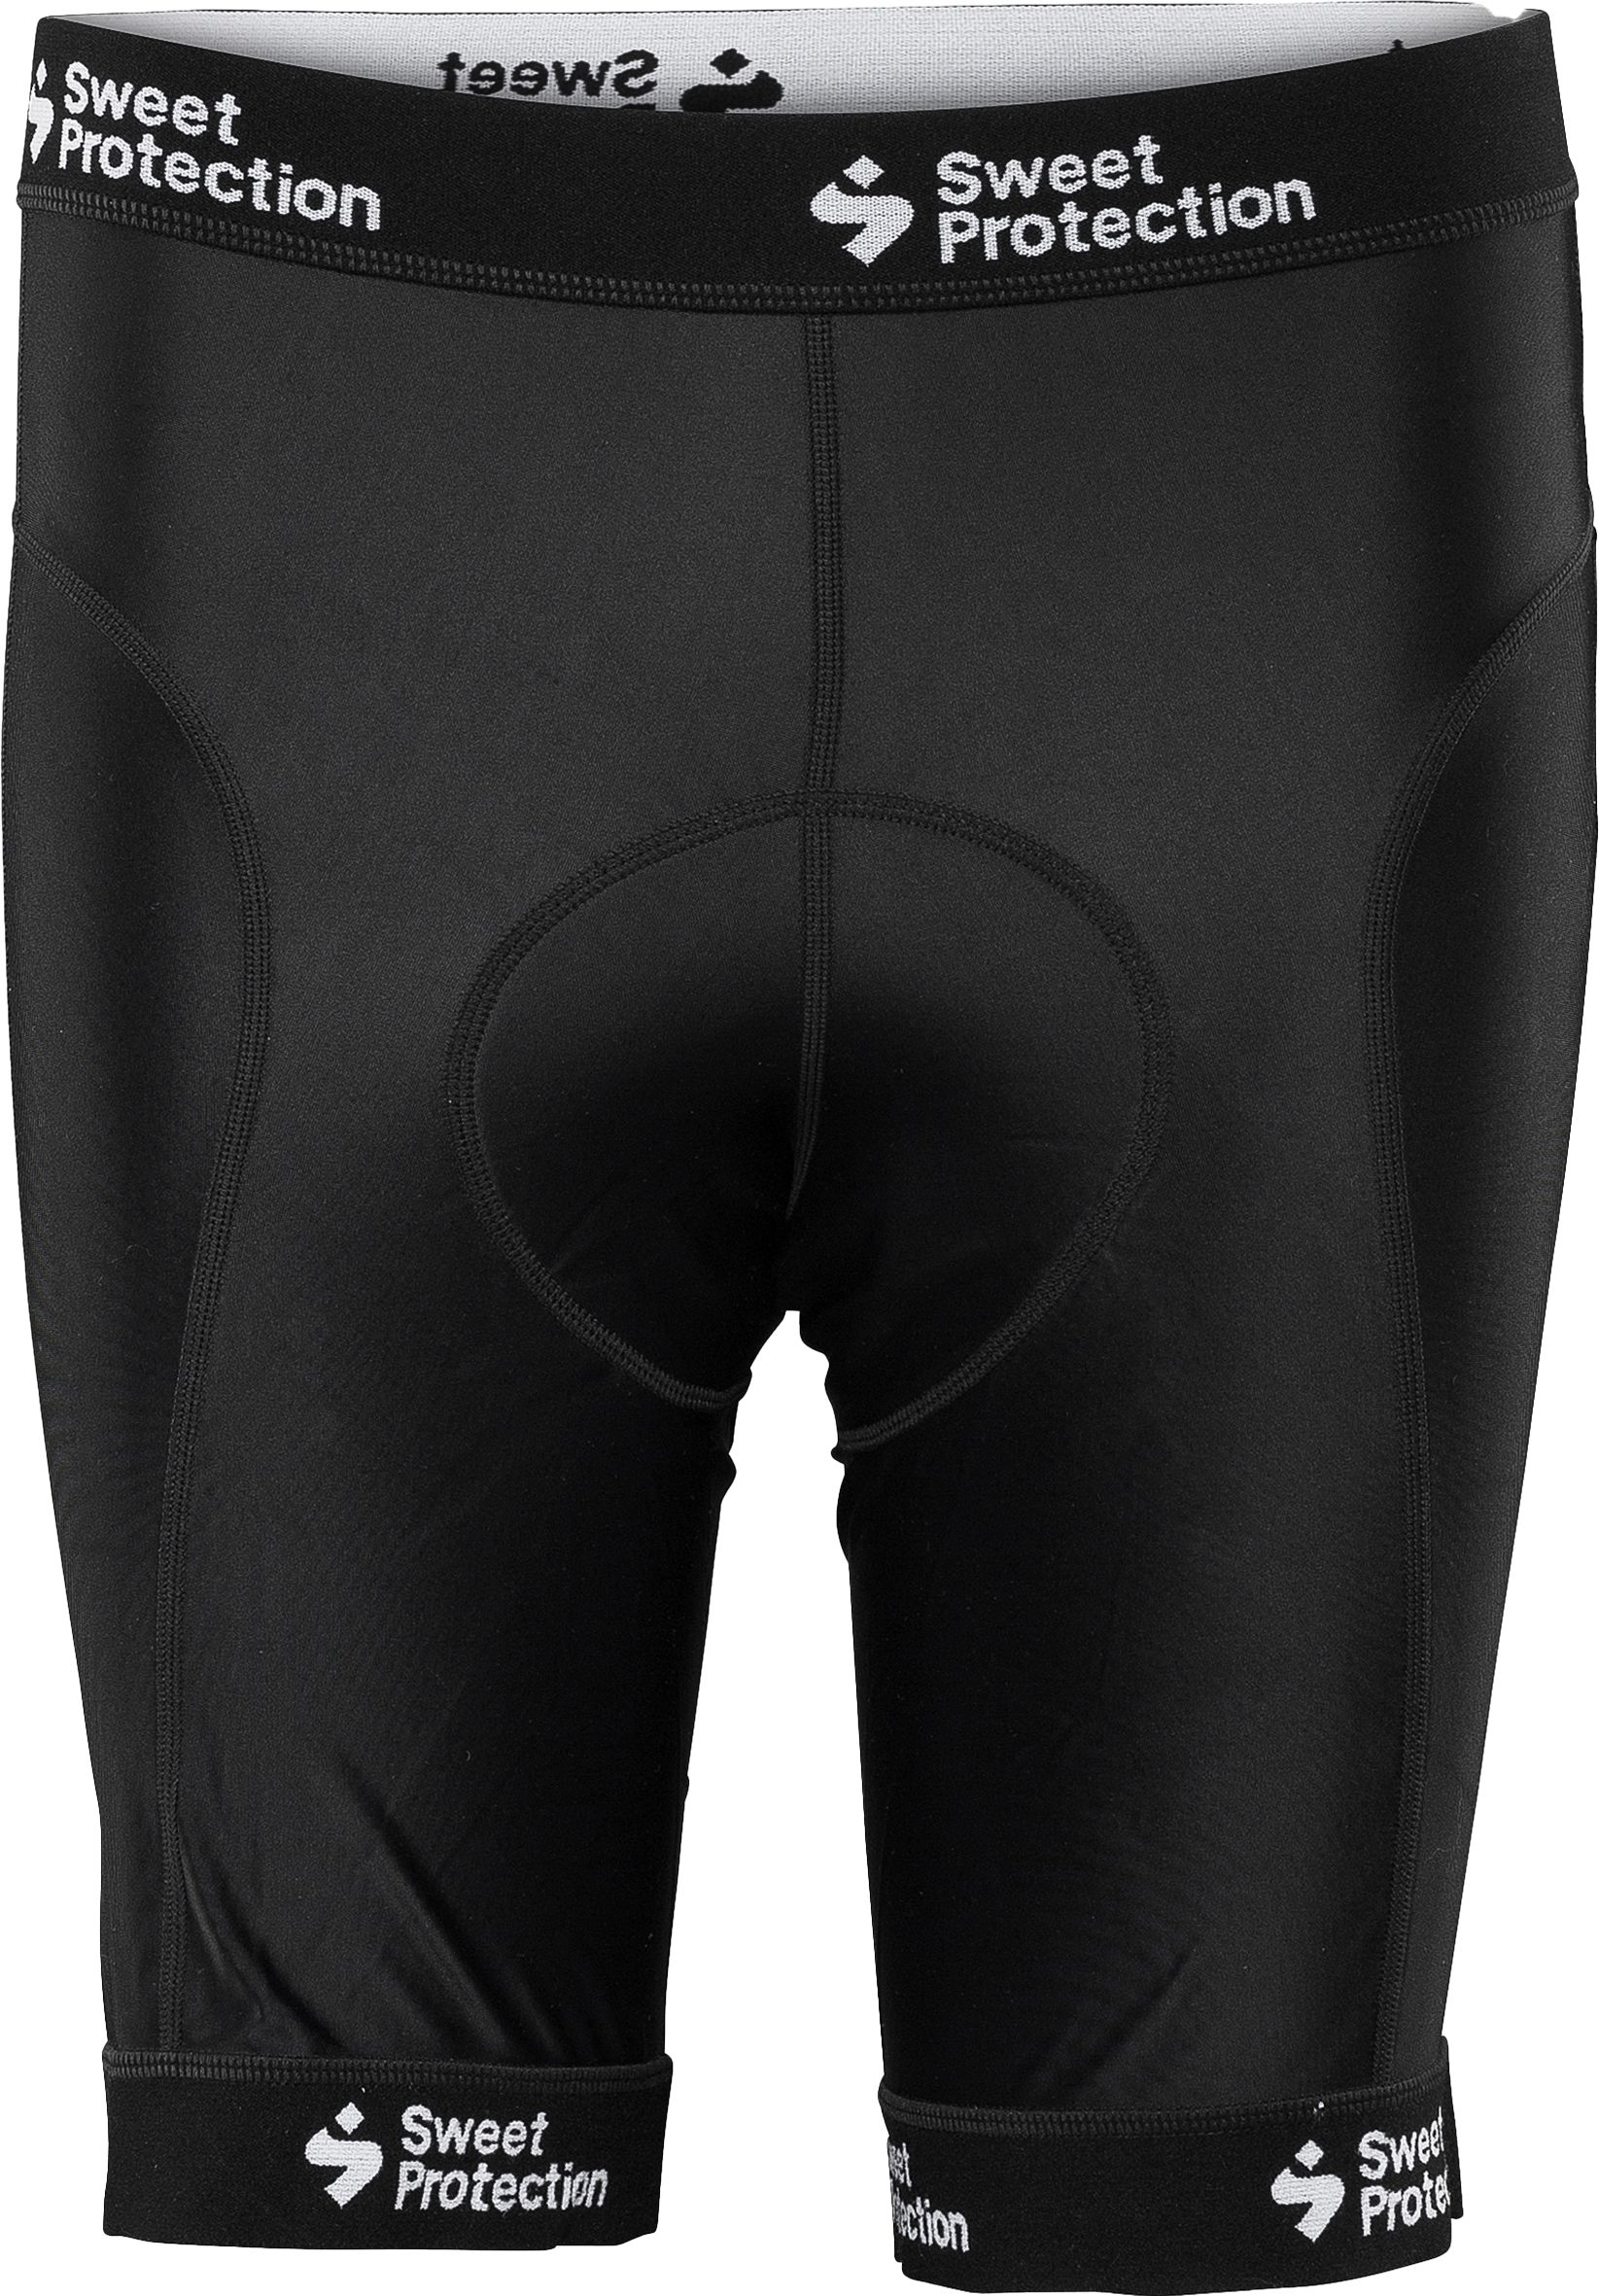 SWEET PROTECTION, M HUNTER ROLLER SHORTS